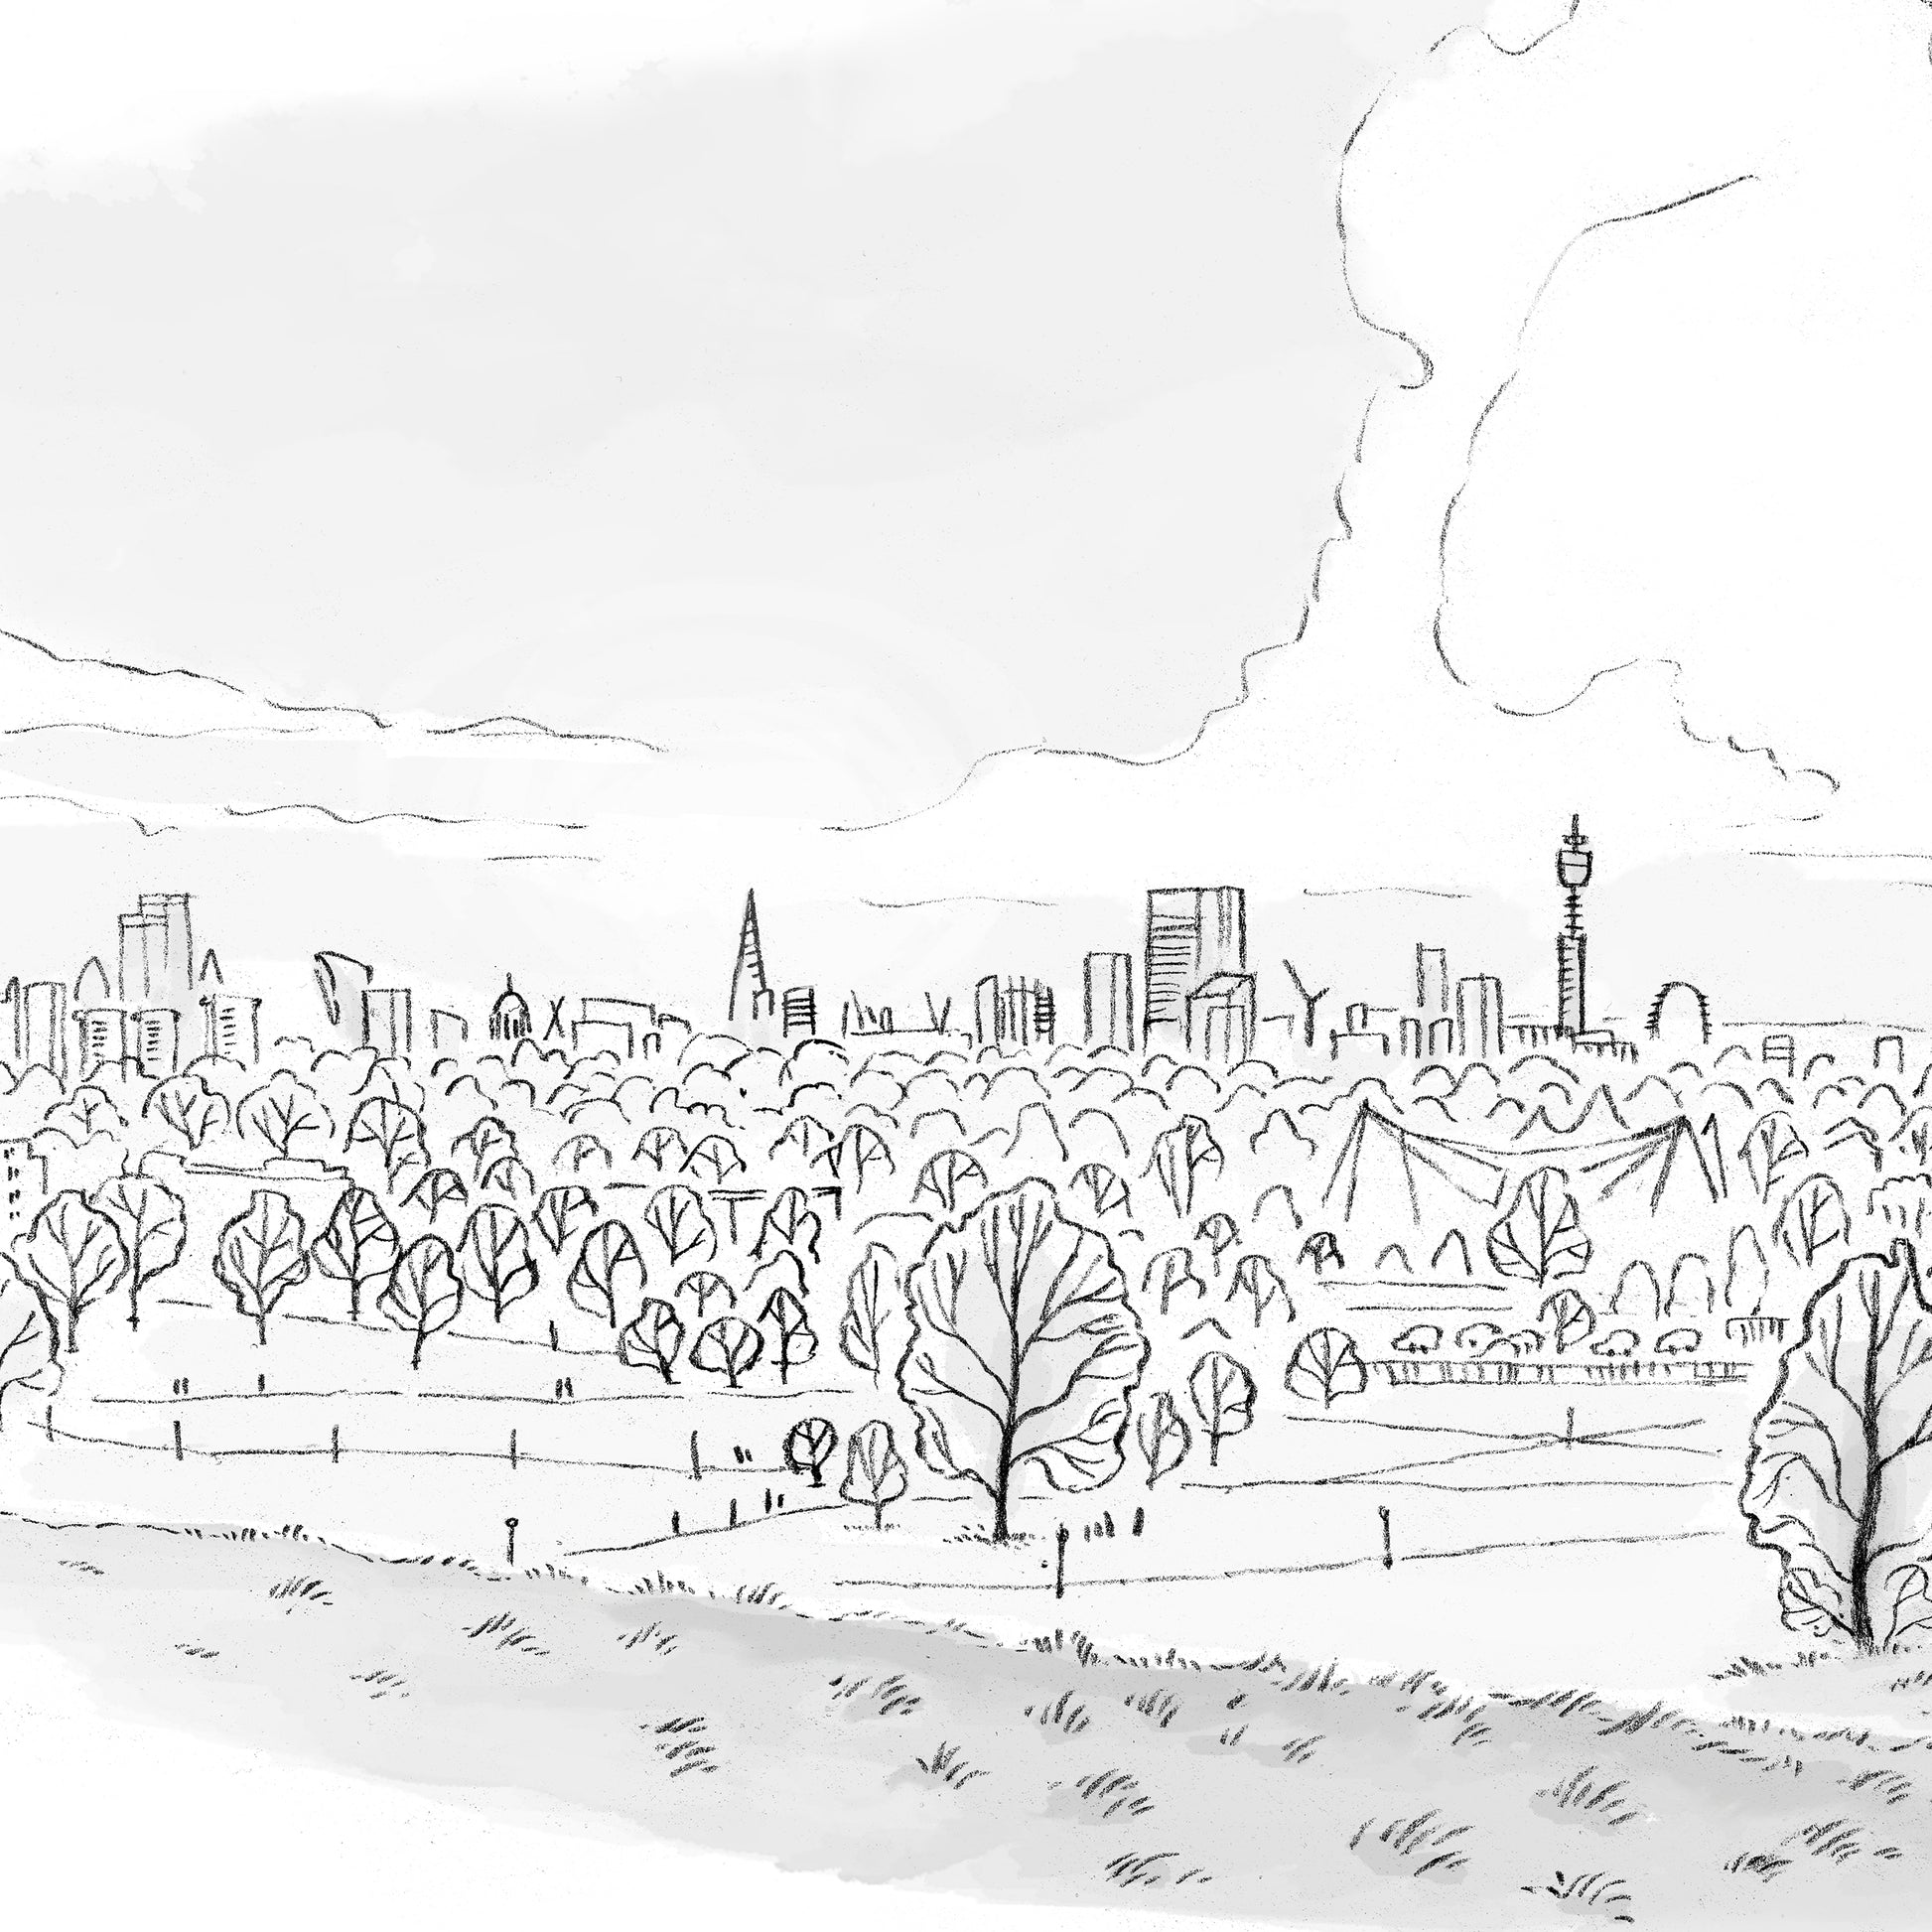 Detail from a print of the view from primrose hill London beautifully sketched by Mike Green.